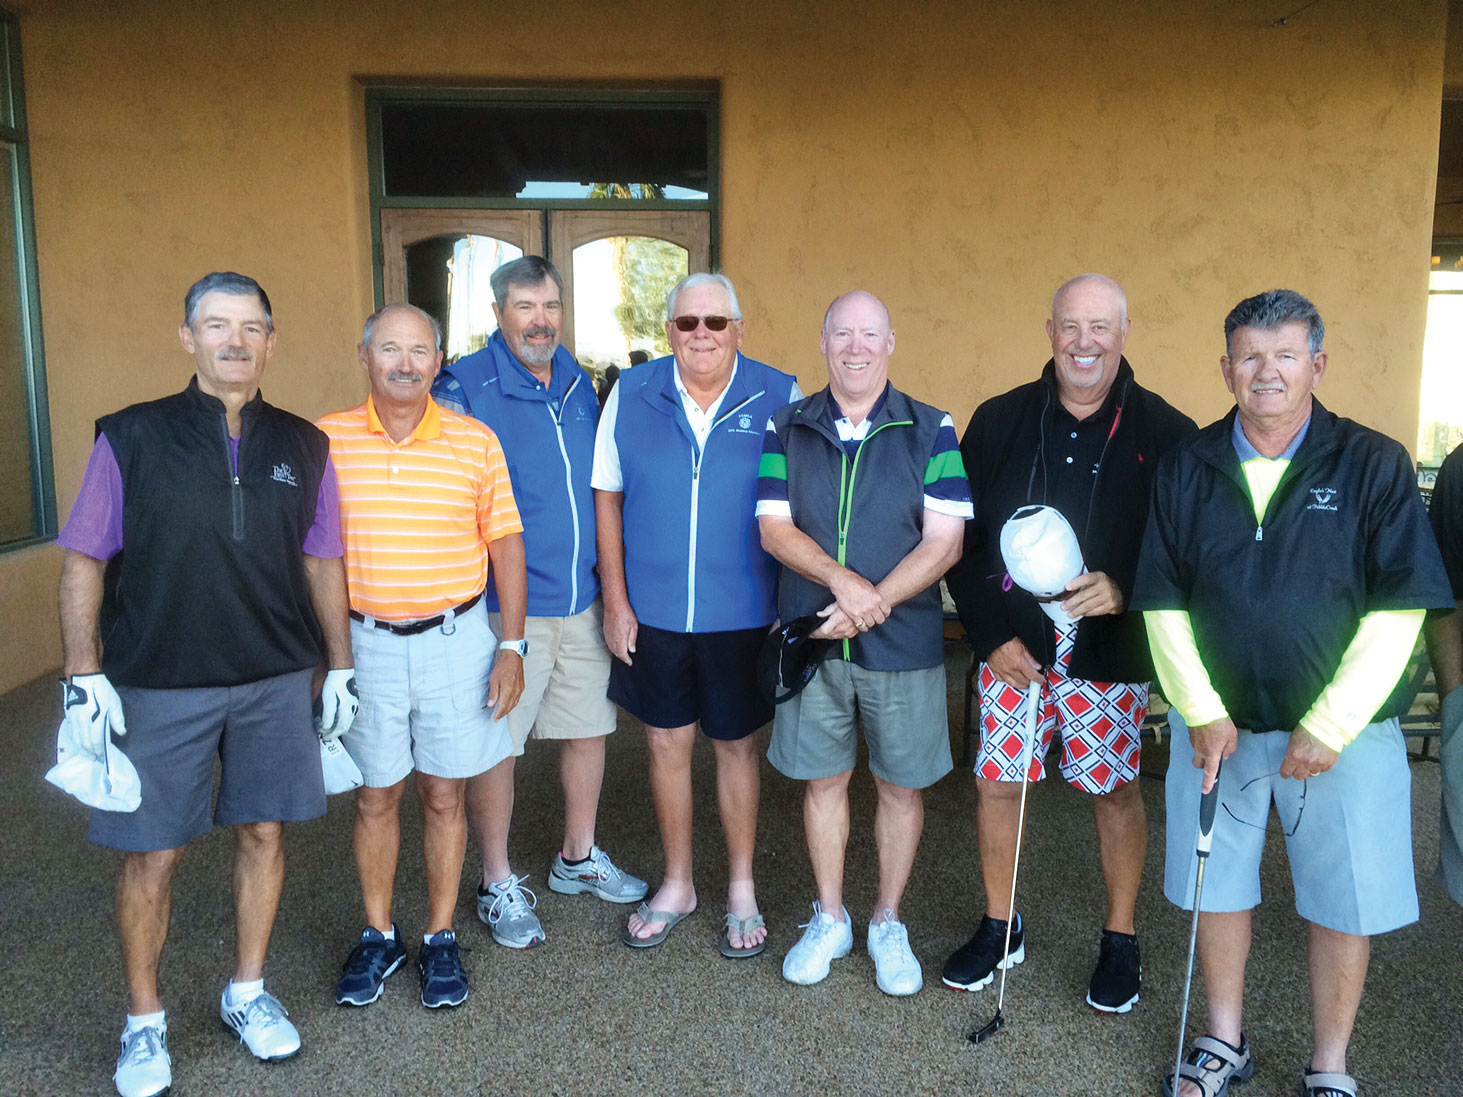 Member-Member winners flights one through four, left to right: Randy Plymell, Dan Anderson, Robert Richards, George Clark, John Krasnan, Marc Goldberg and Norm Munger; not pictured, Nick Castiglione